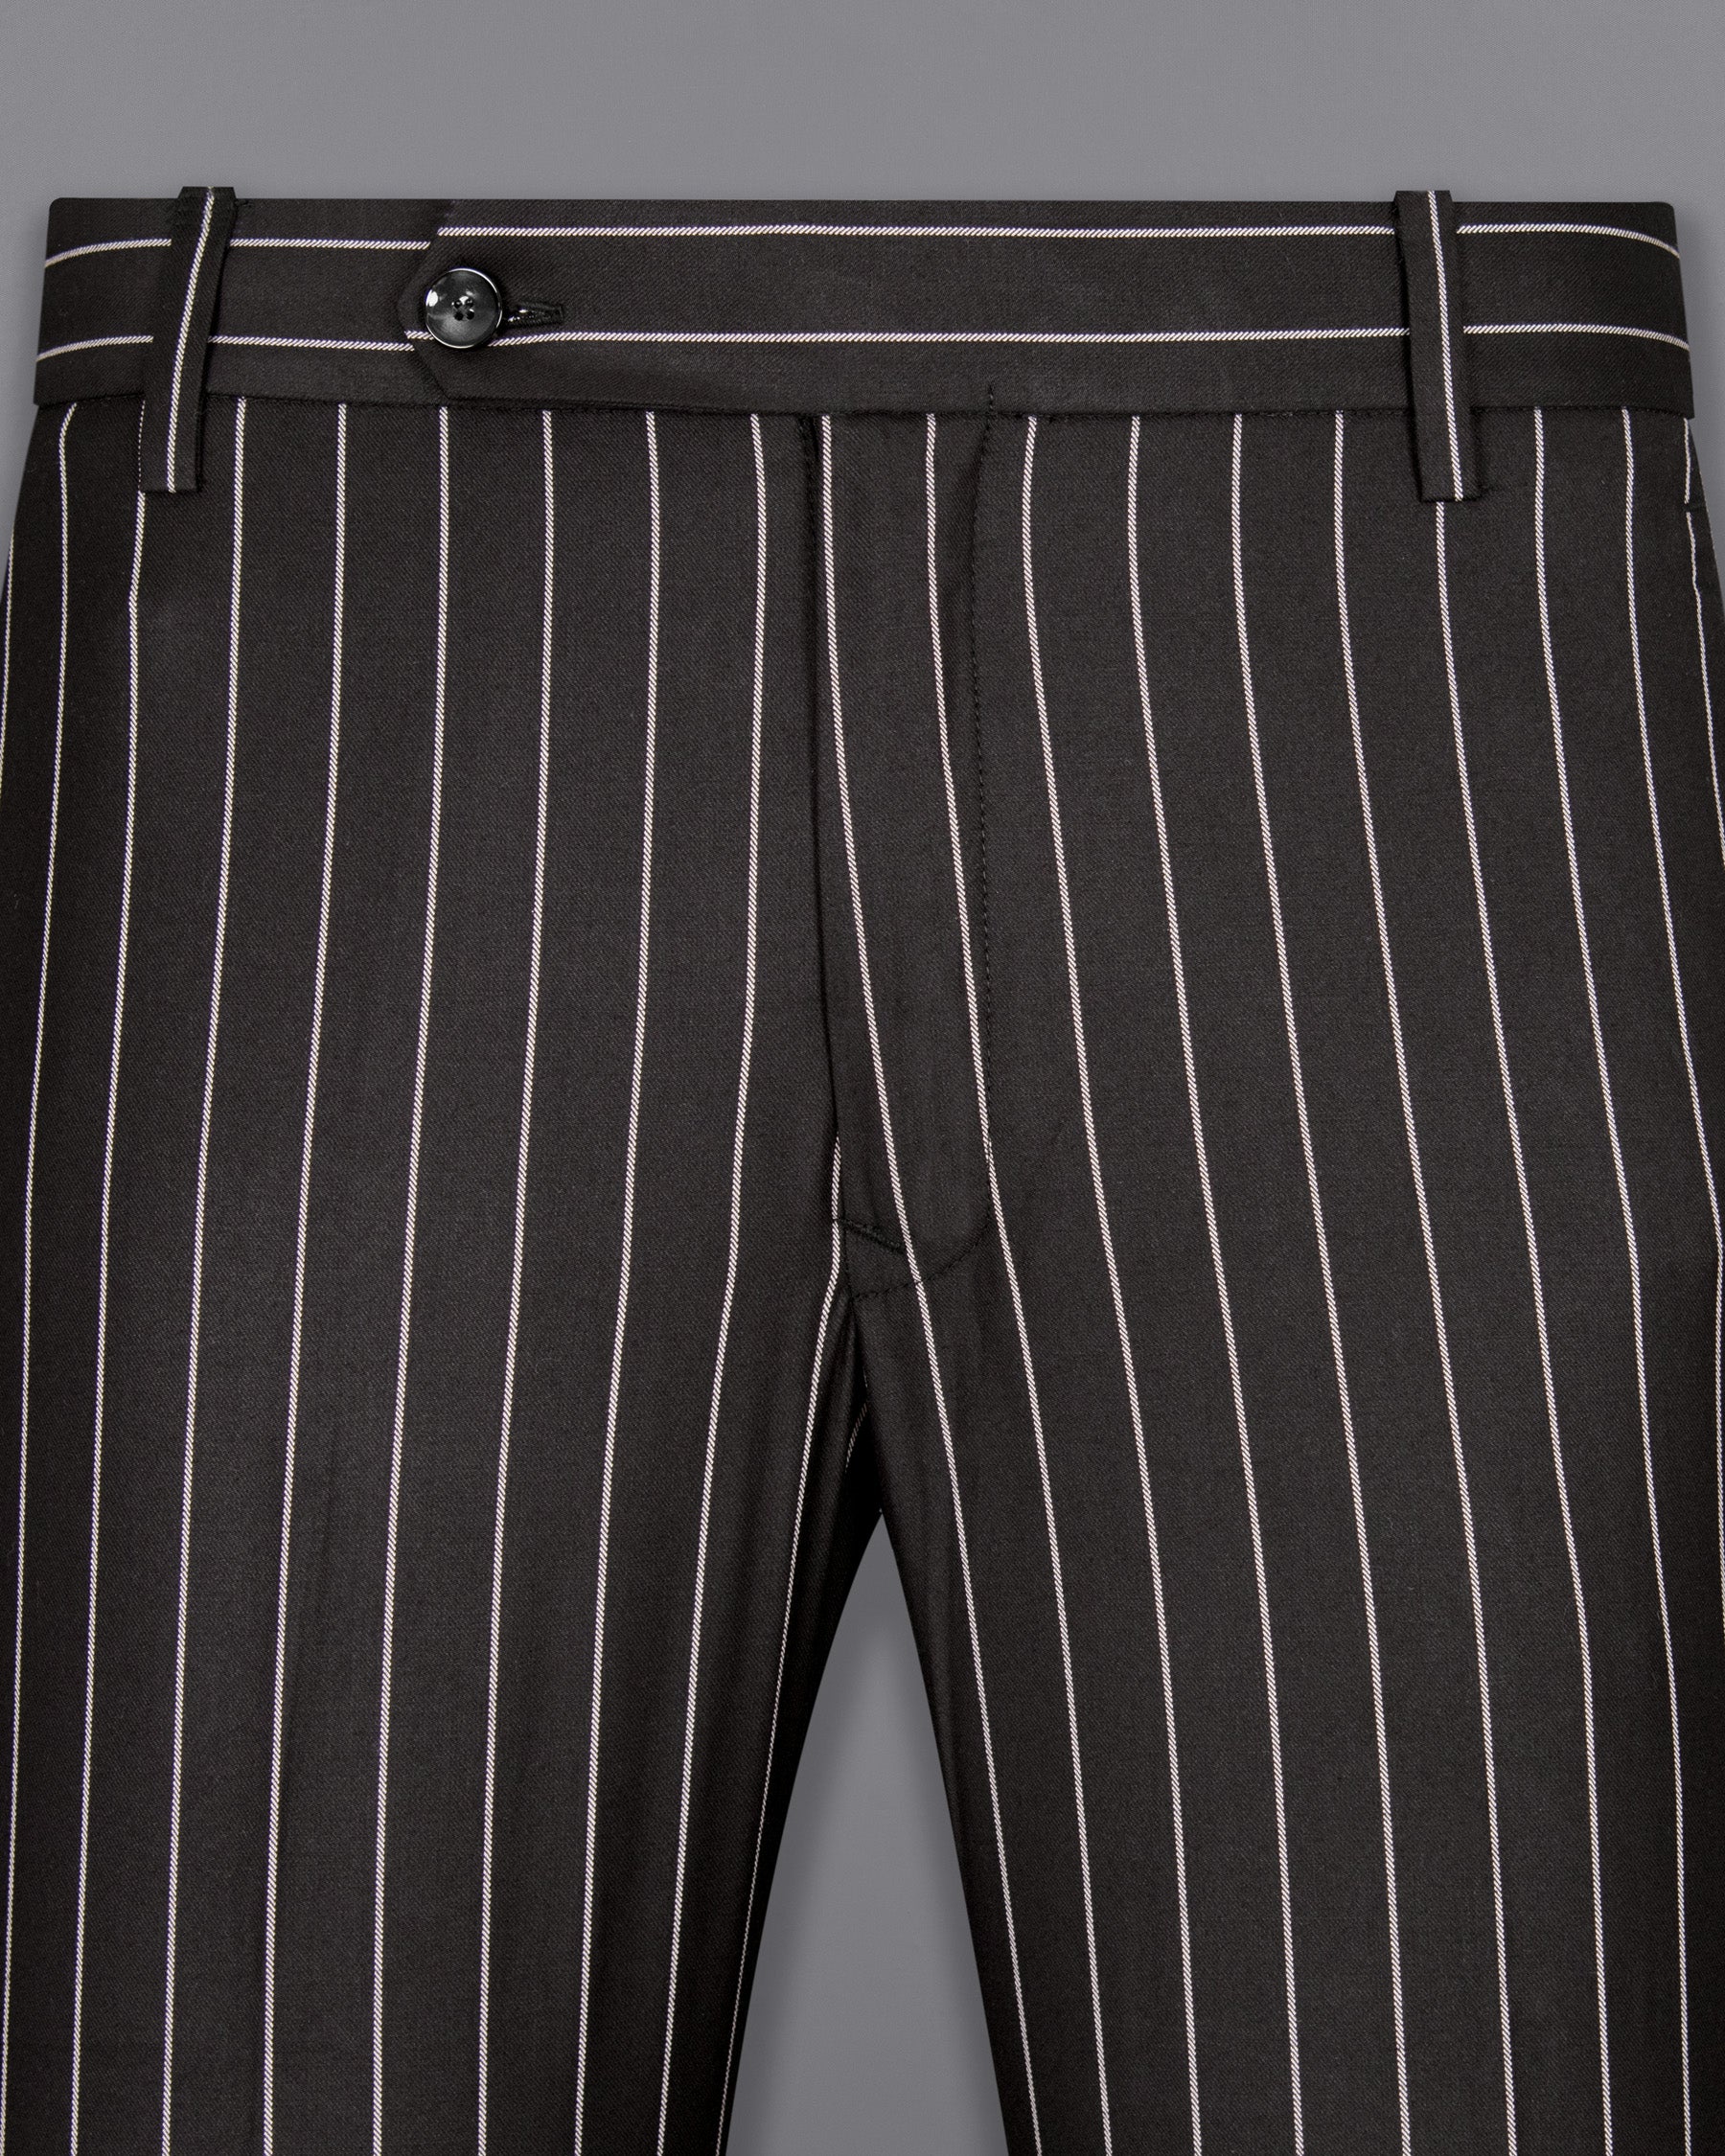 Charcoal Gray with white Striped Woolrich Pant T1293-28, T1293-30, T1293-32, T1293-34, T1293-38, T1293-36, T1293-40, T1293-42, T1293-44